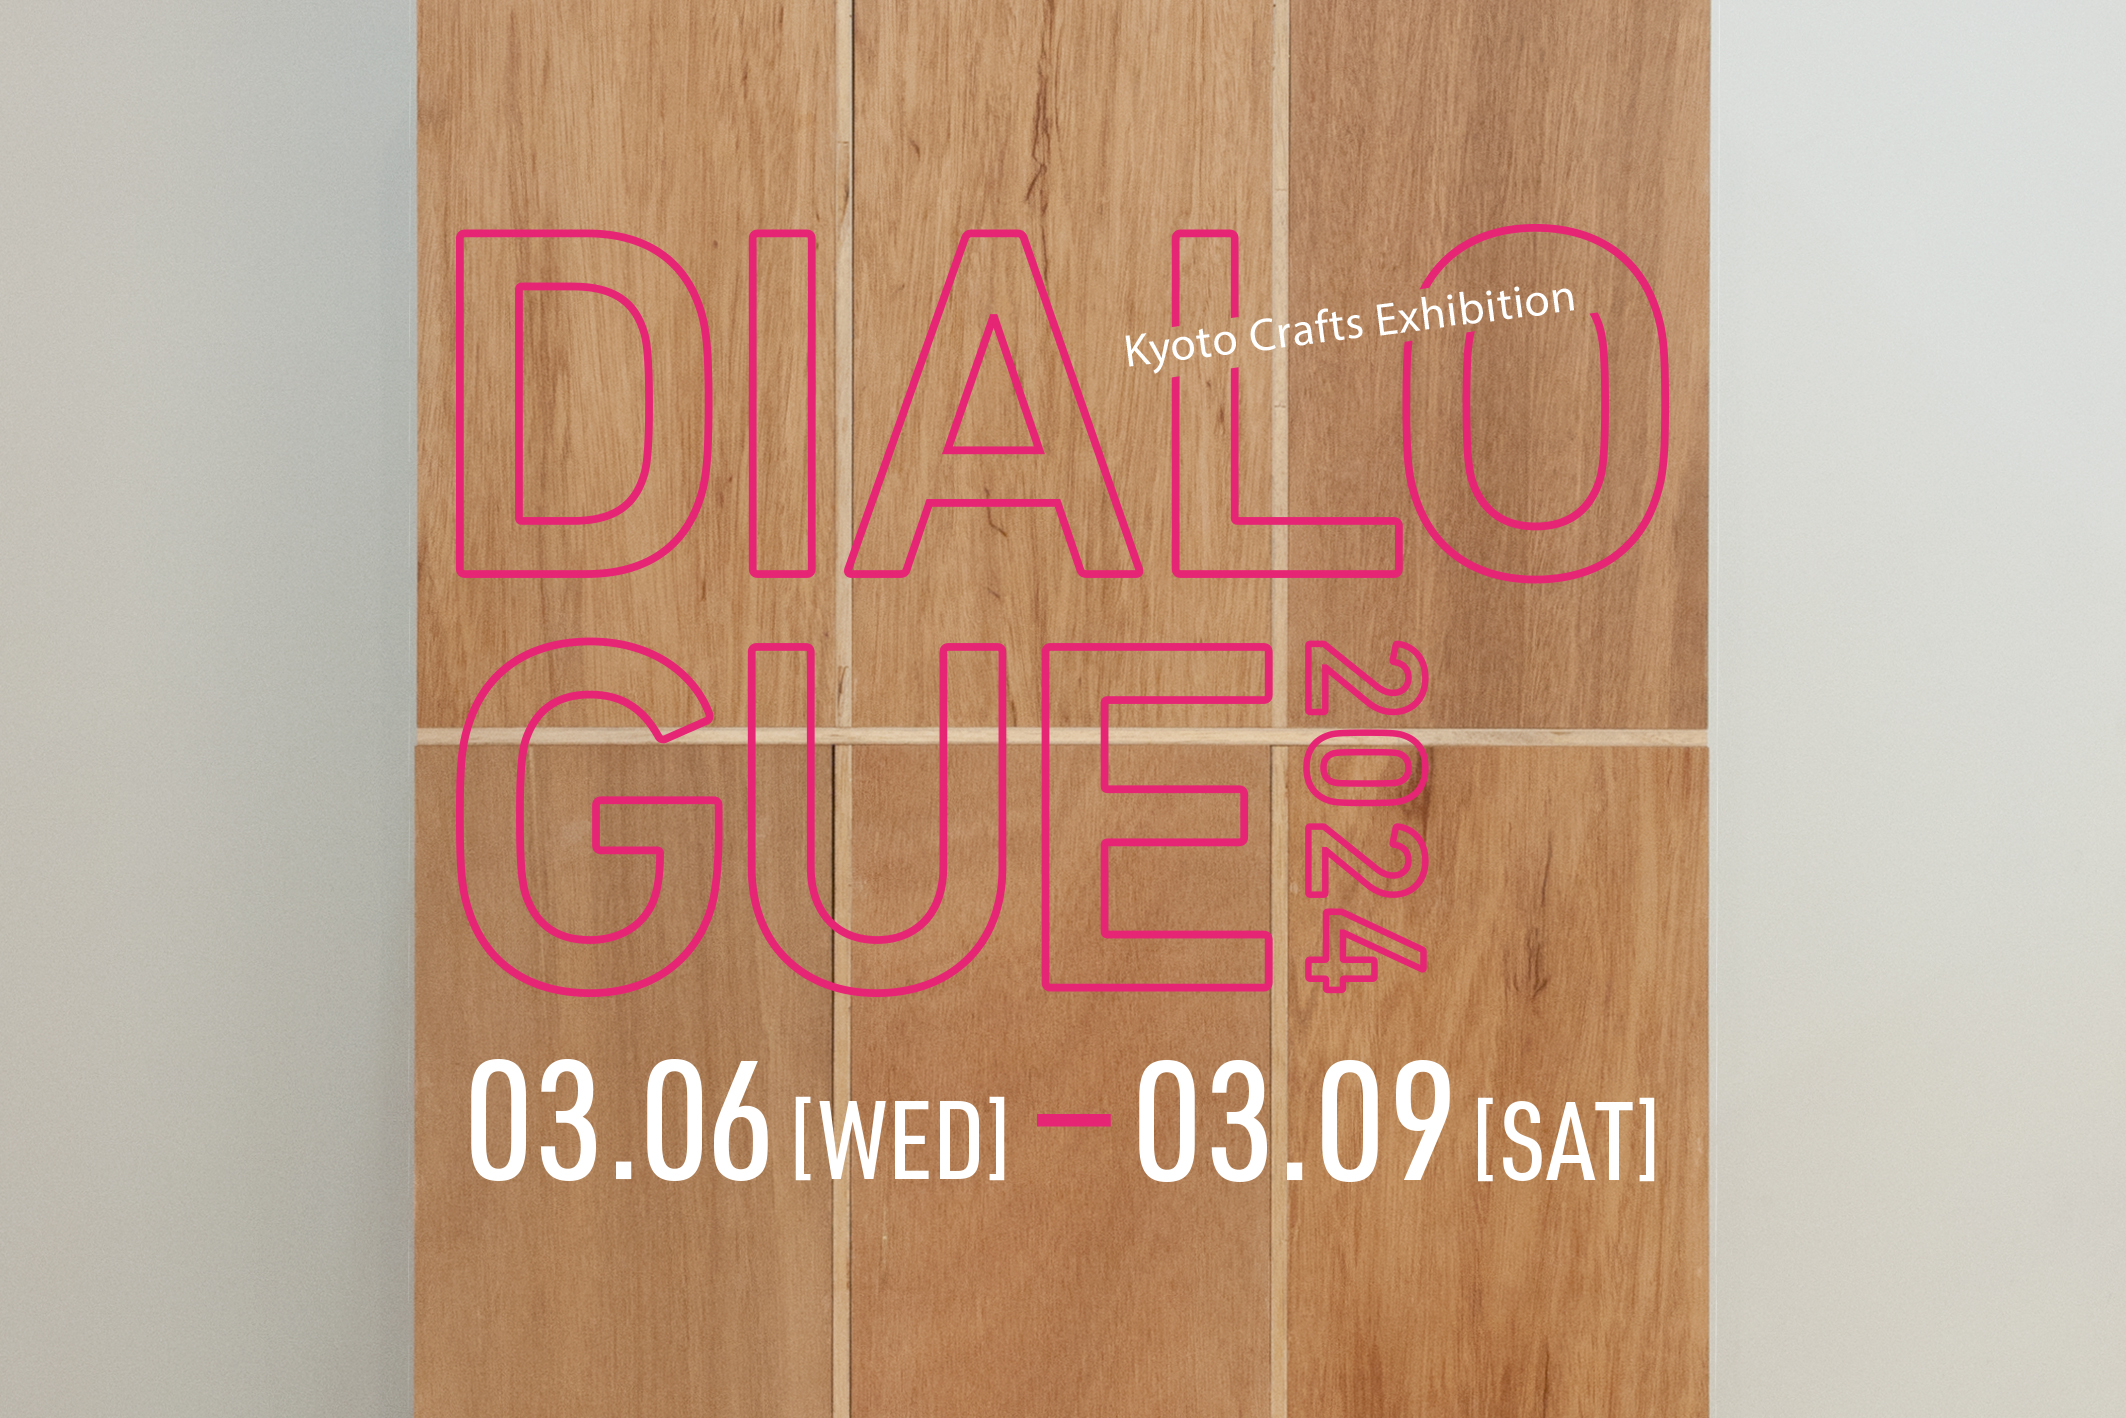 3/6-9「Kyoto Crafts Exhibition DIALOGUE」出展のお知らせ（京都）